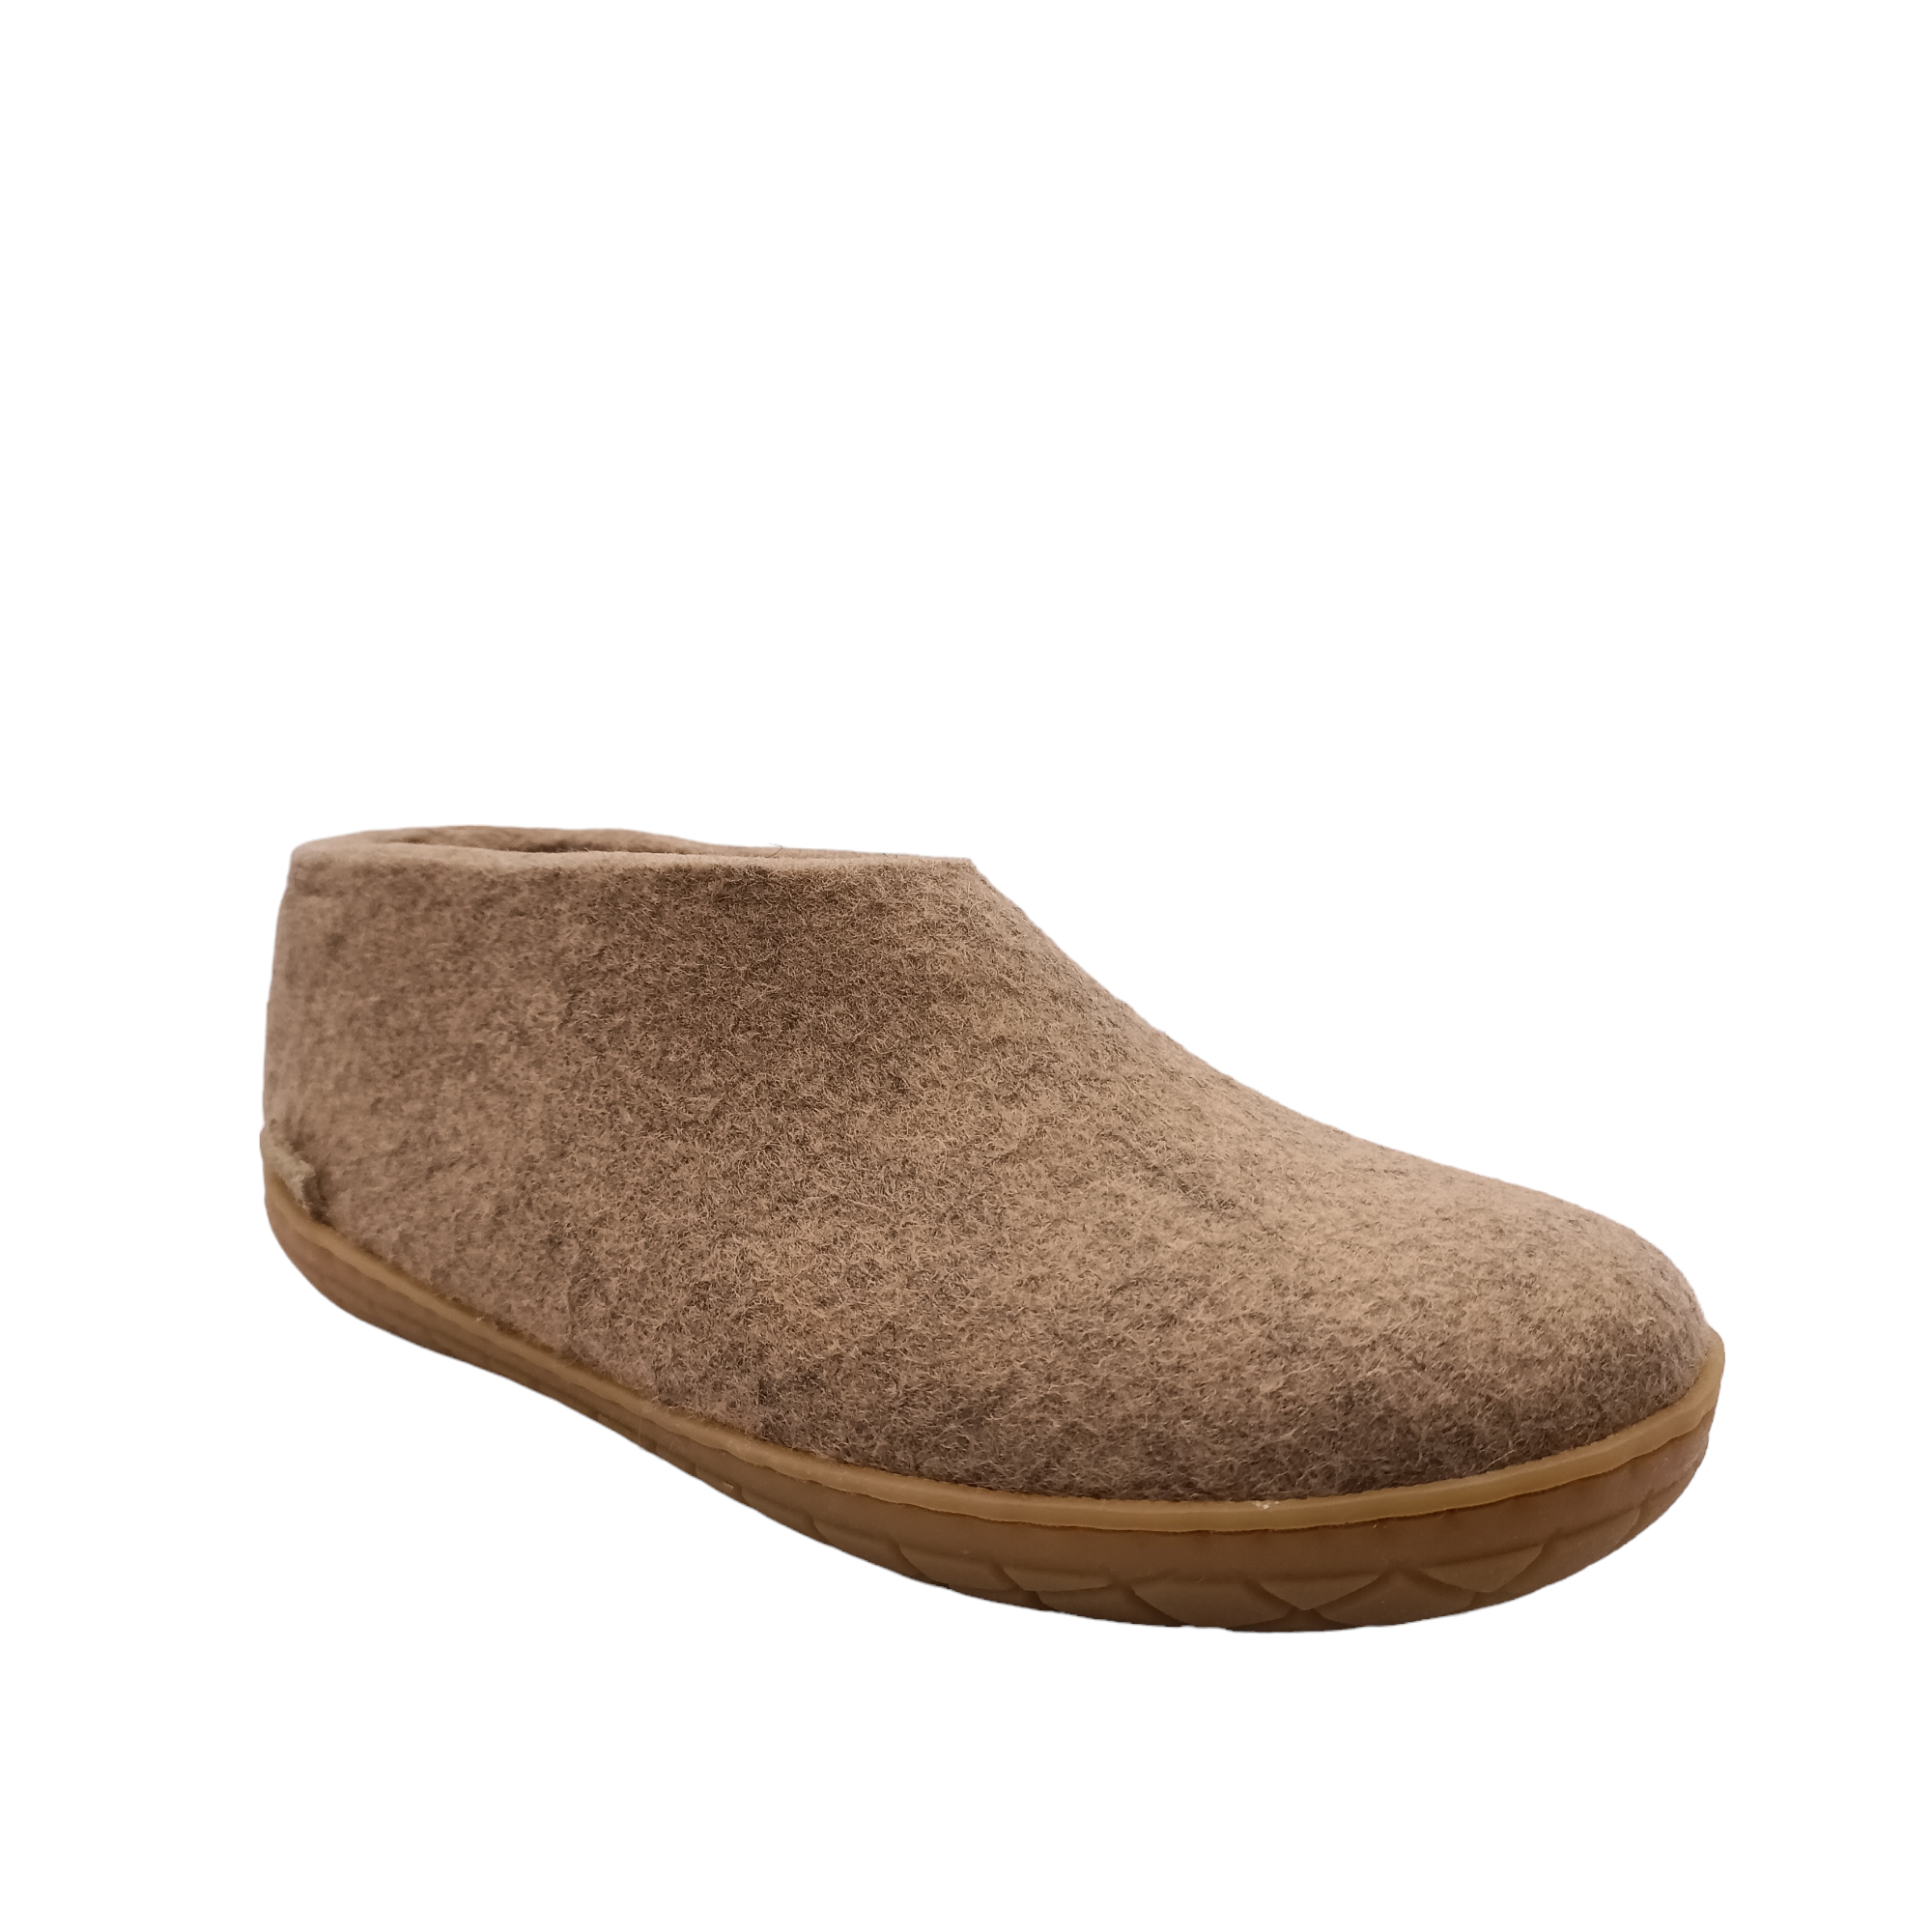 Front angle view off sand coloured felt wool Glerup shoe or slipper. Shop slippers online and instore with shoe&amp;me Mount Maunganui.